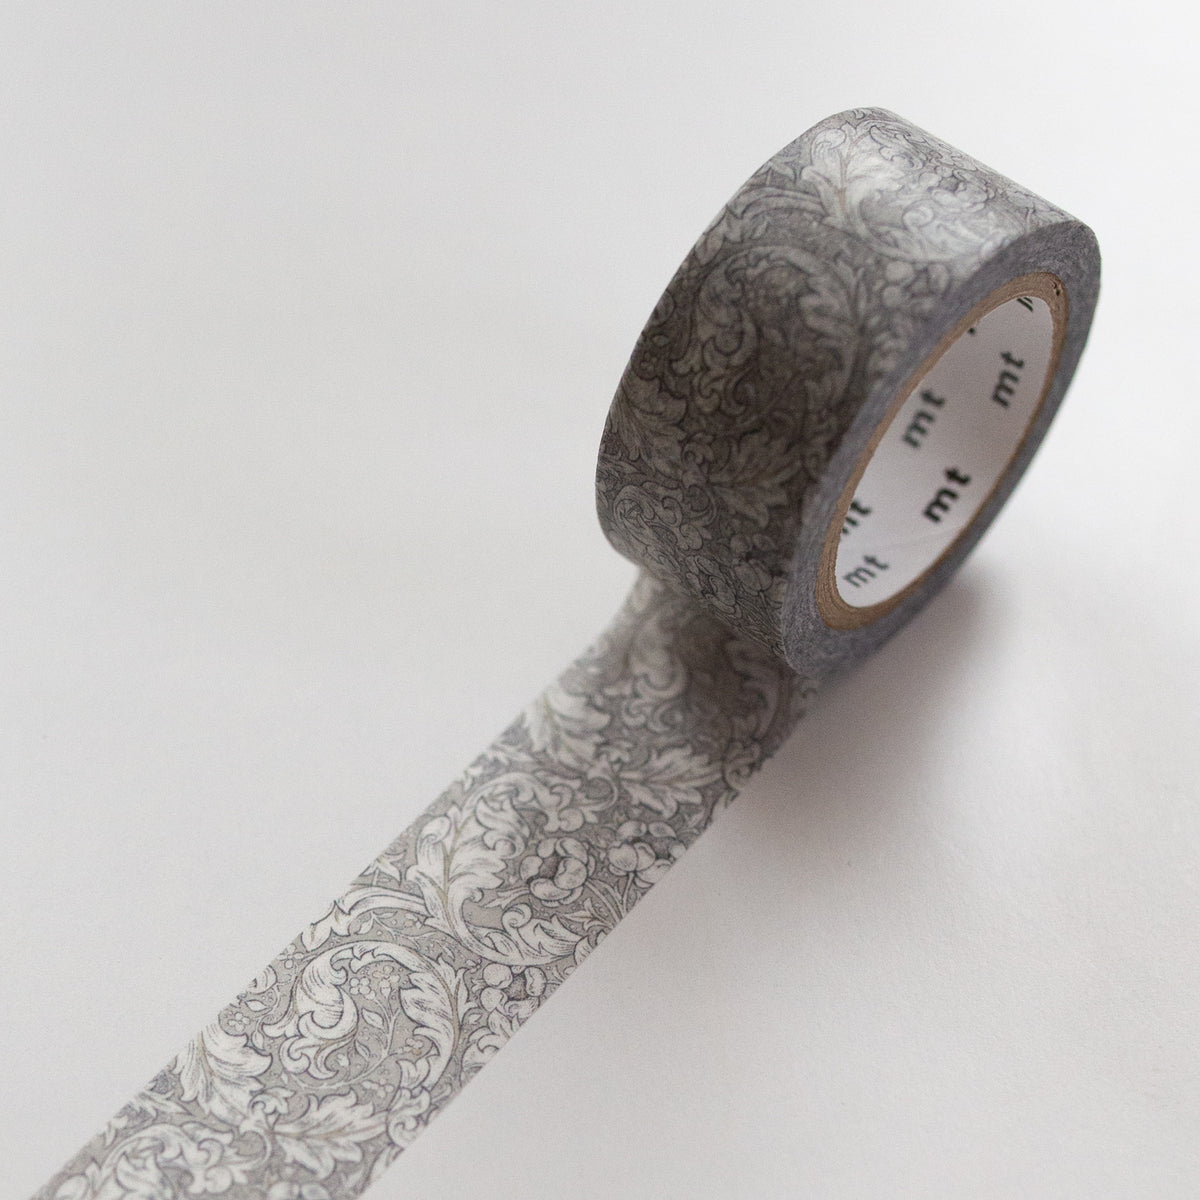 Mt Masking tape William Morris Pure Bachelors Button Stone Lime